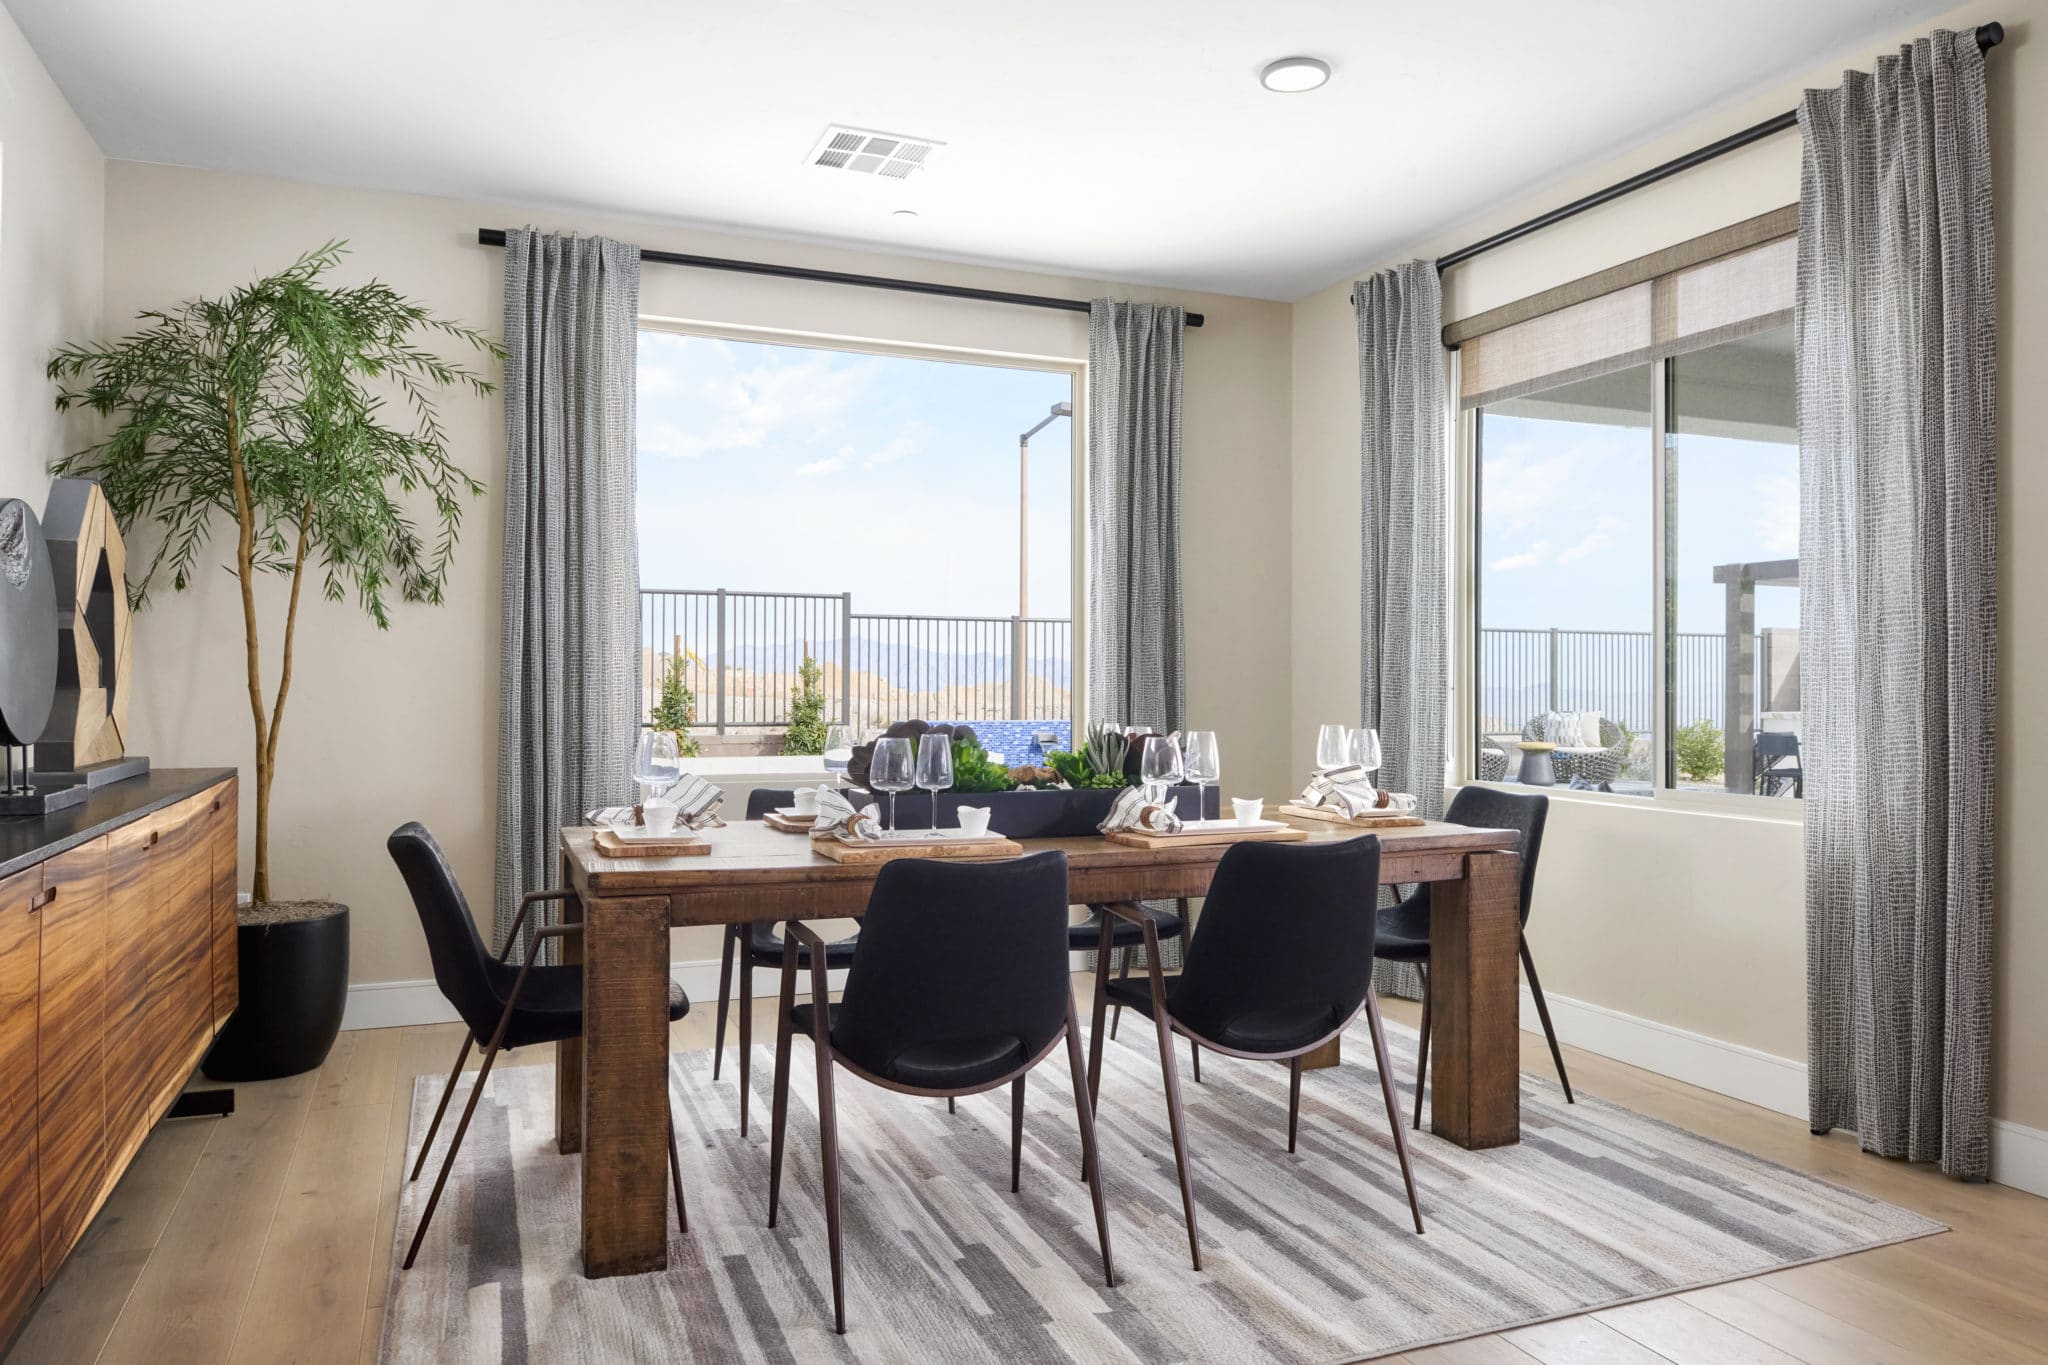 Dining Room of Plan 1 at Kings Canyon by Tri Pointe Homes